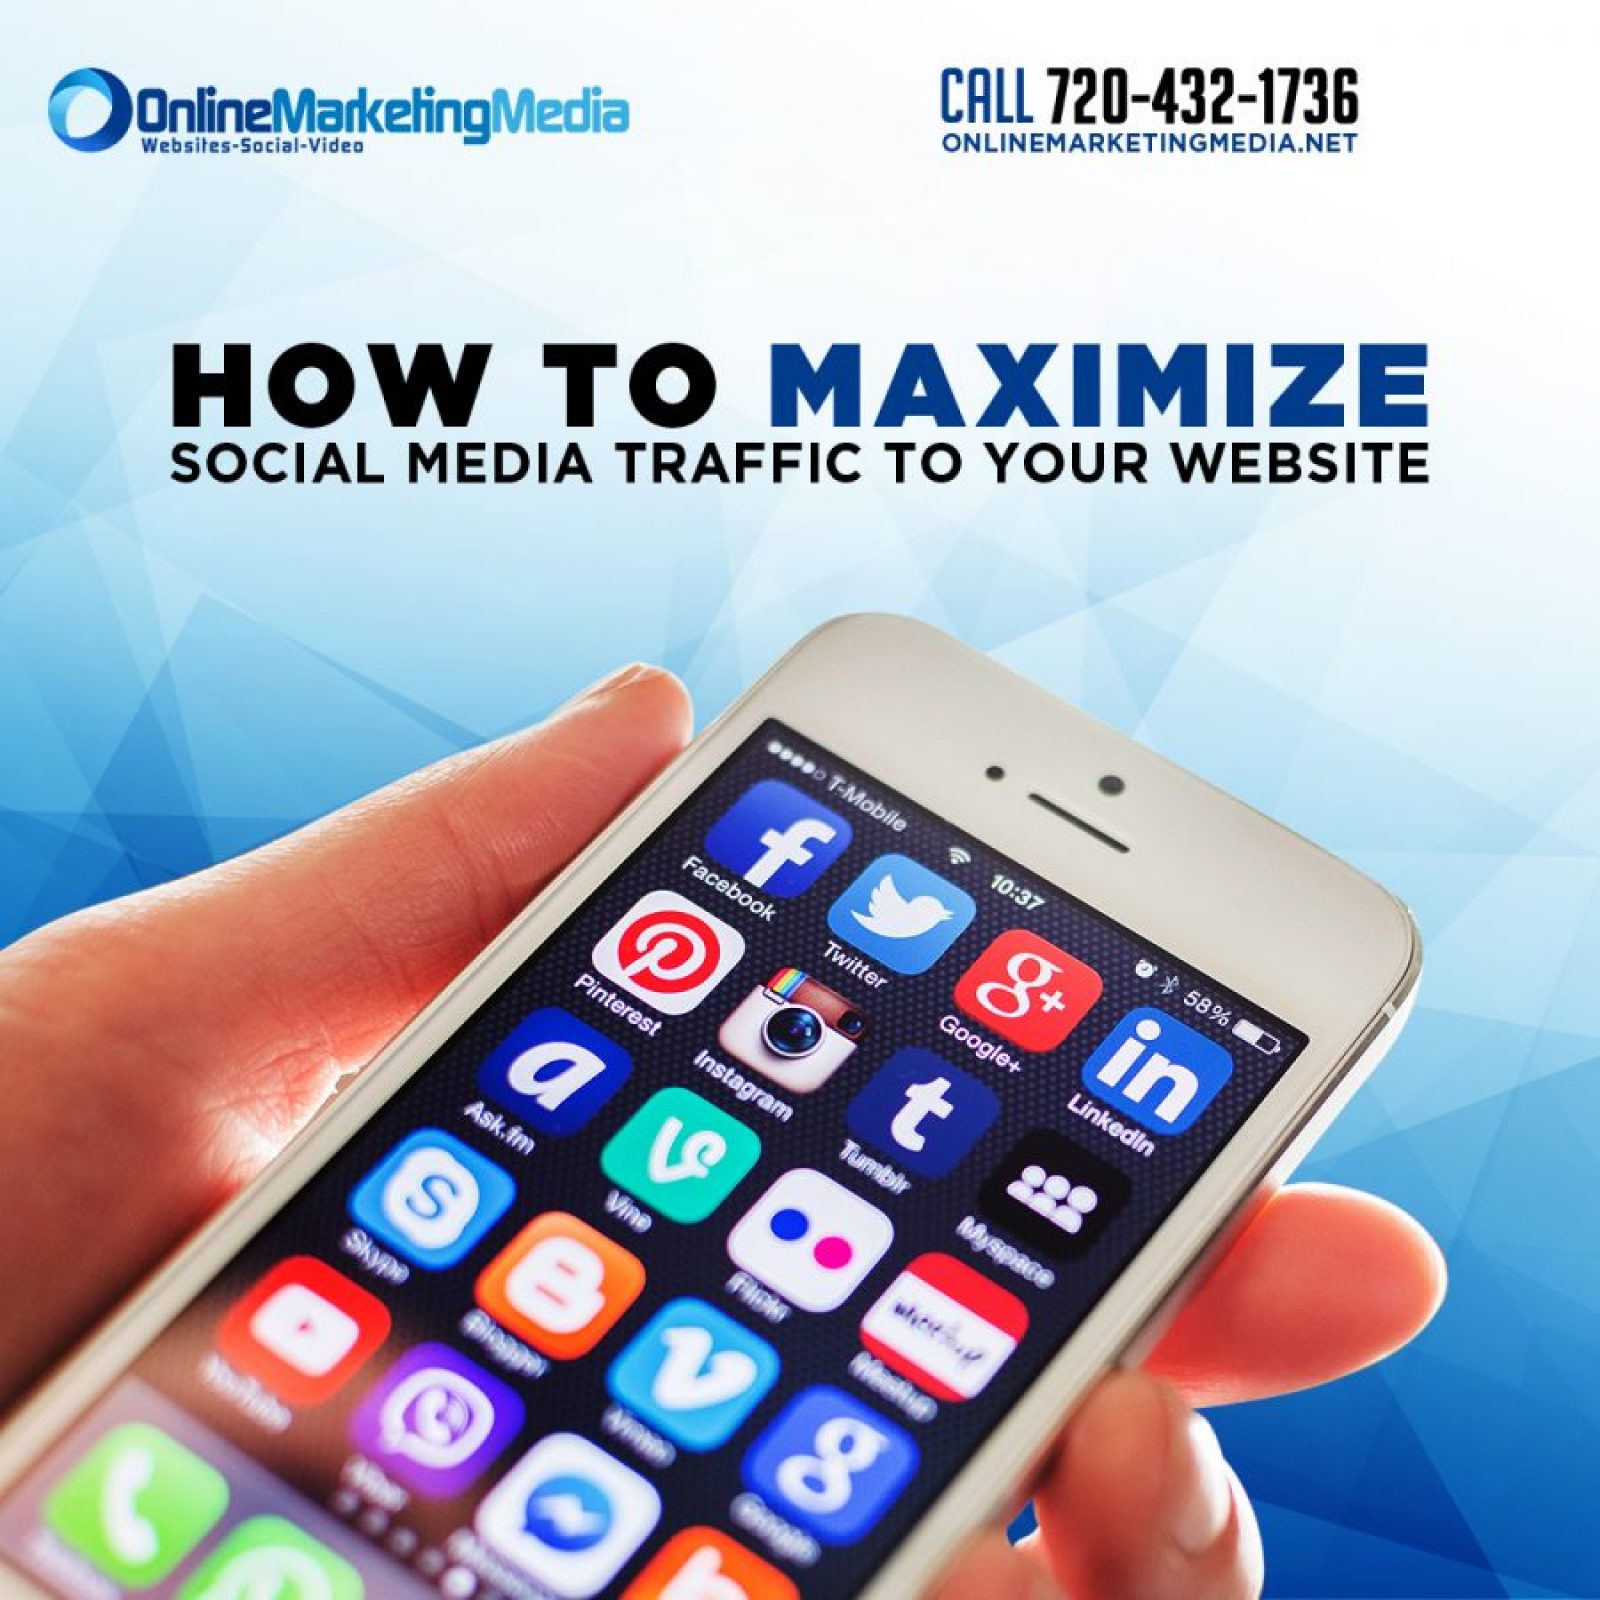 How to Maximize Social Media Traffic to Your Website